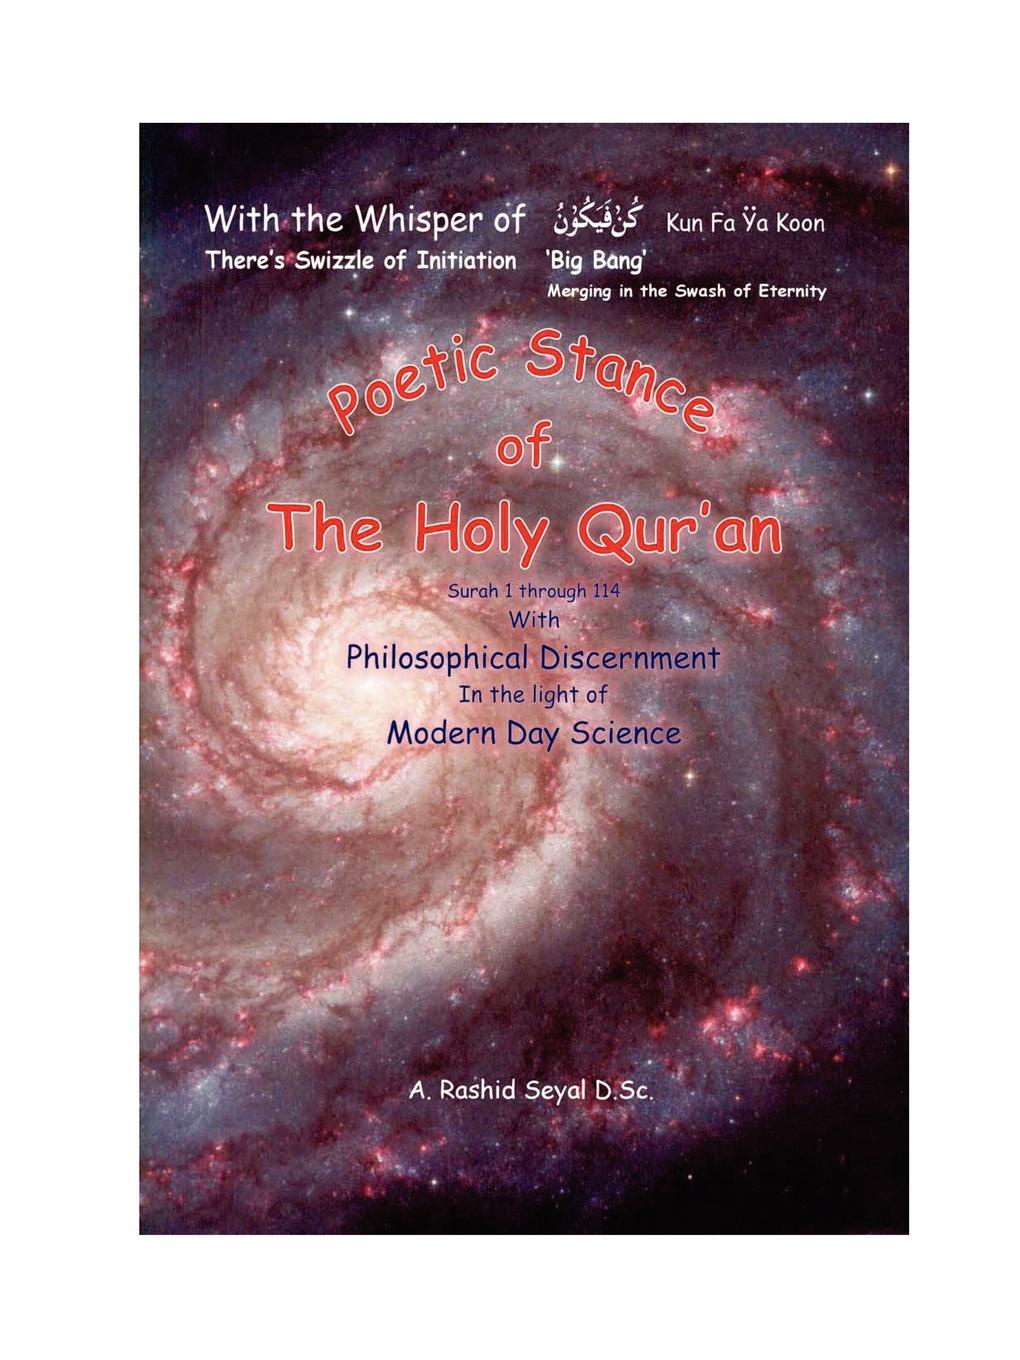 Poetic Stance of the Holy Qur`an. Philosophical Discernment in the Light of Modern Day Science